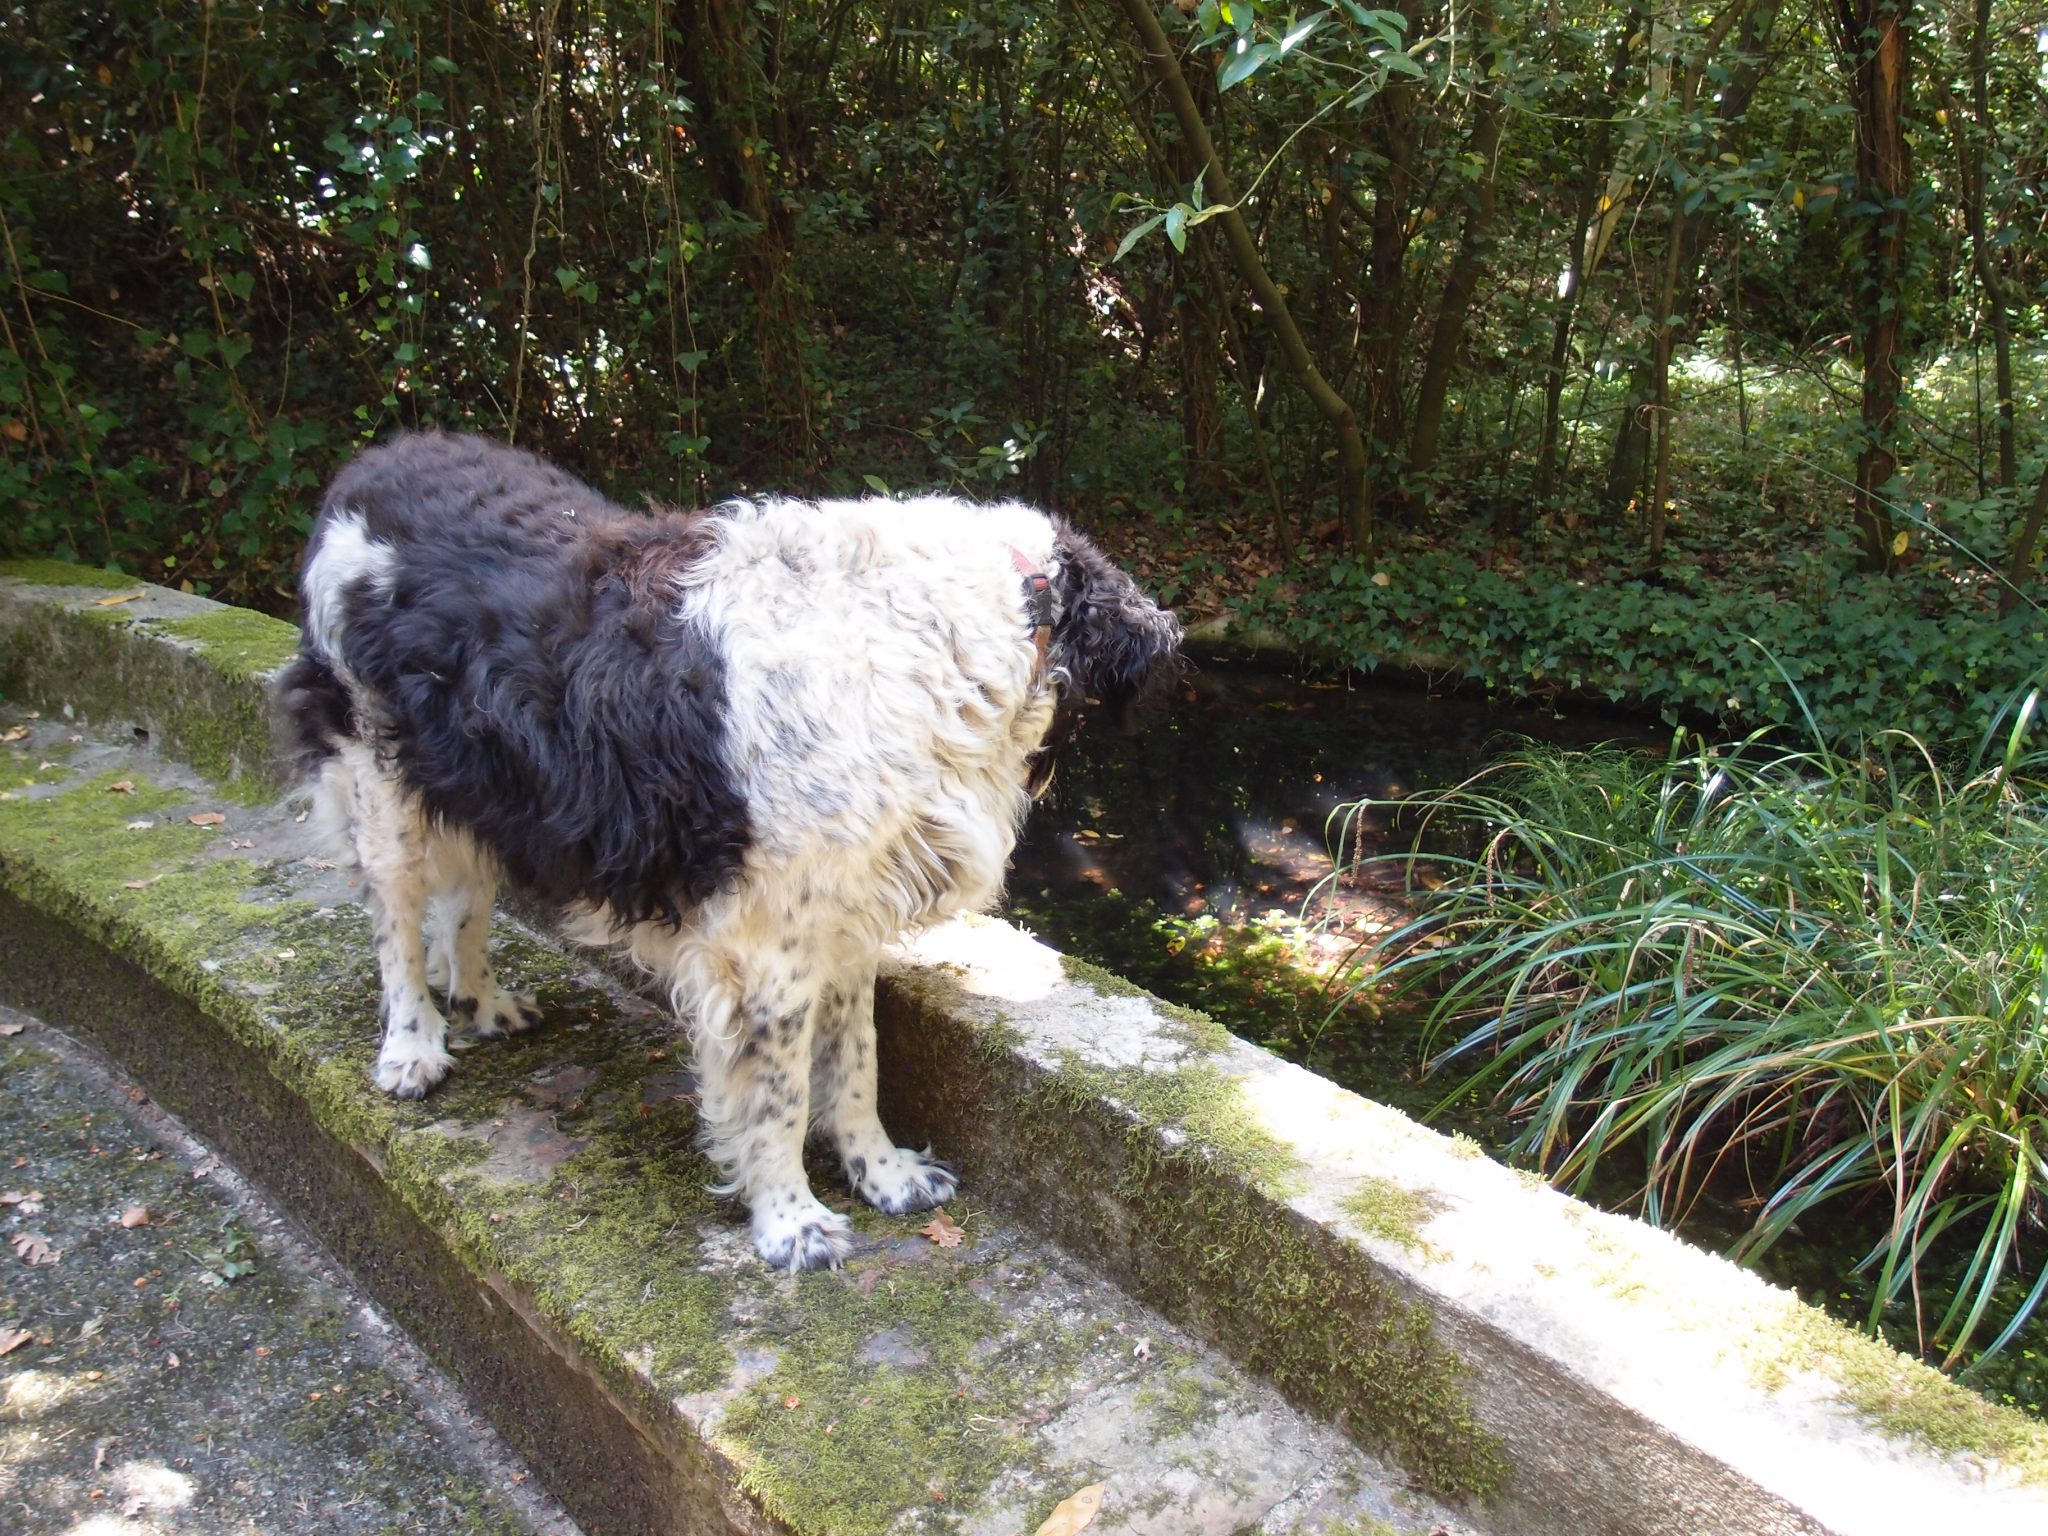 Our Lead Dog pauses to sniff some very interesting pond scum.